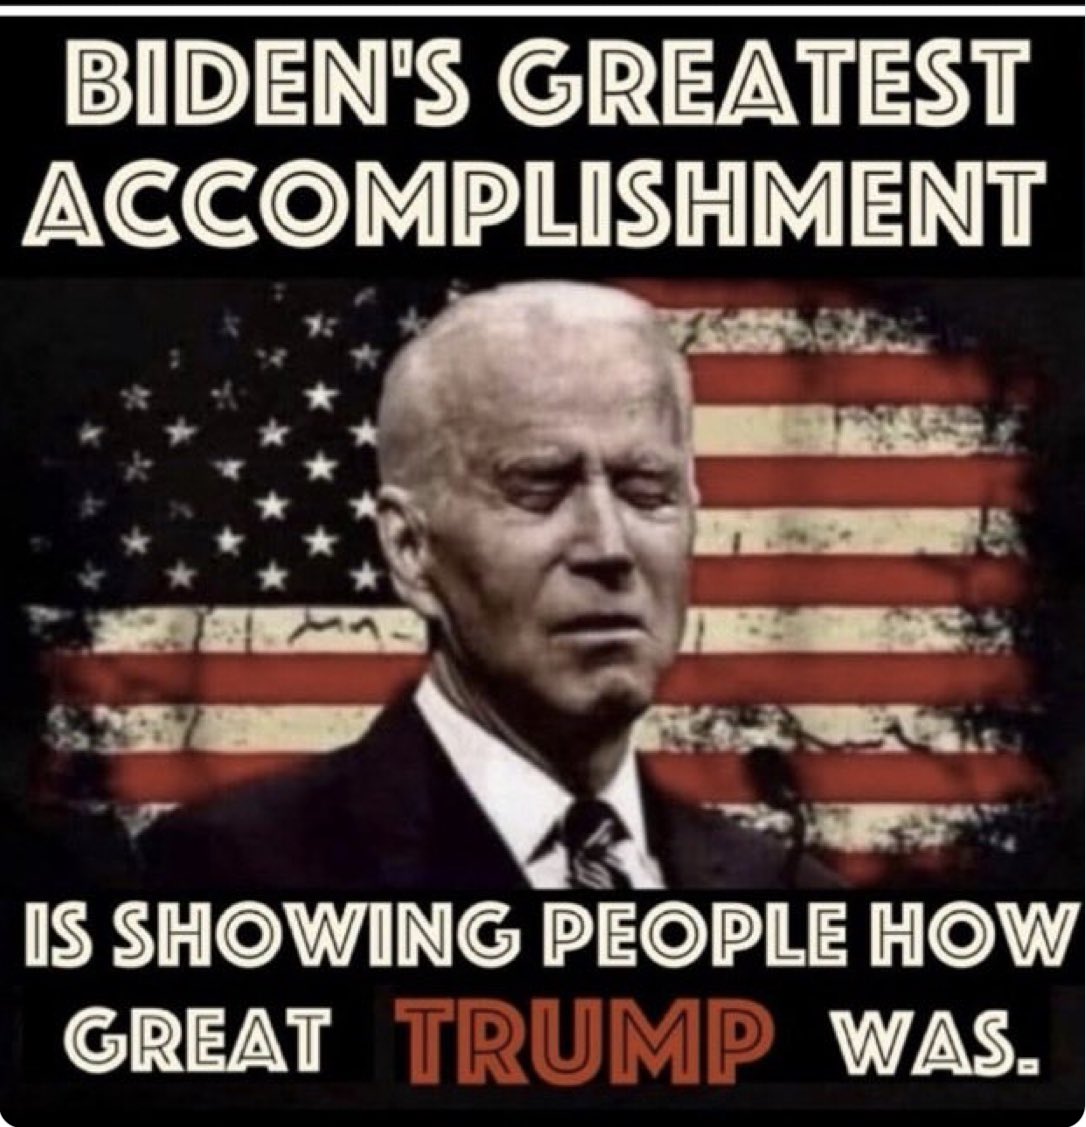 Biden’s Greatest Accomplishment is showing people how Great President Trump was, Repost if you agree.